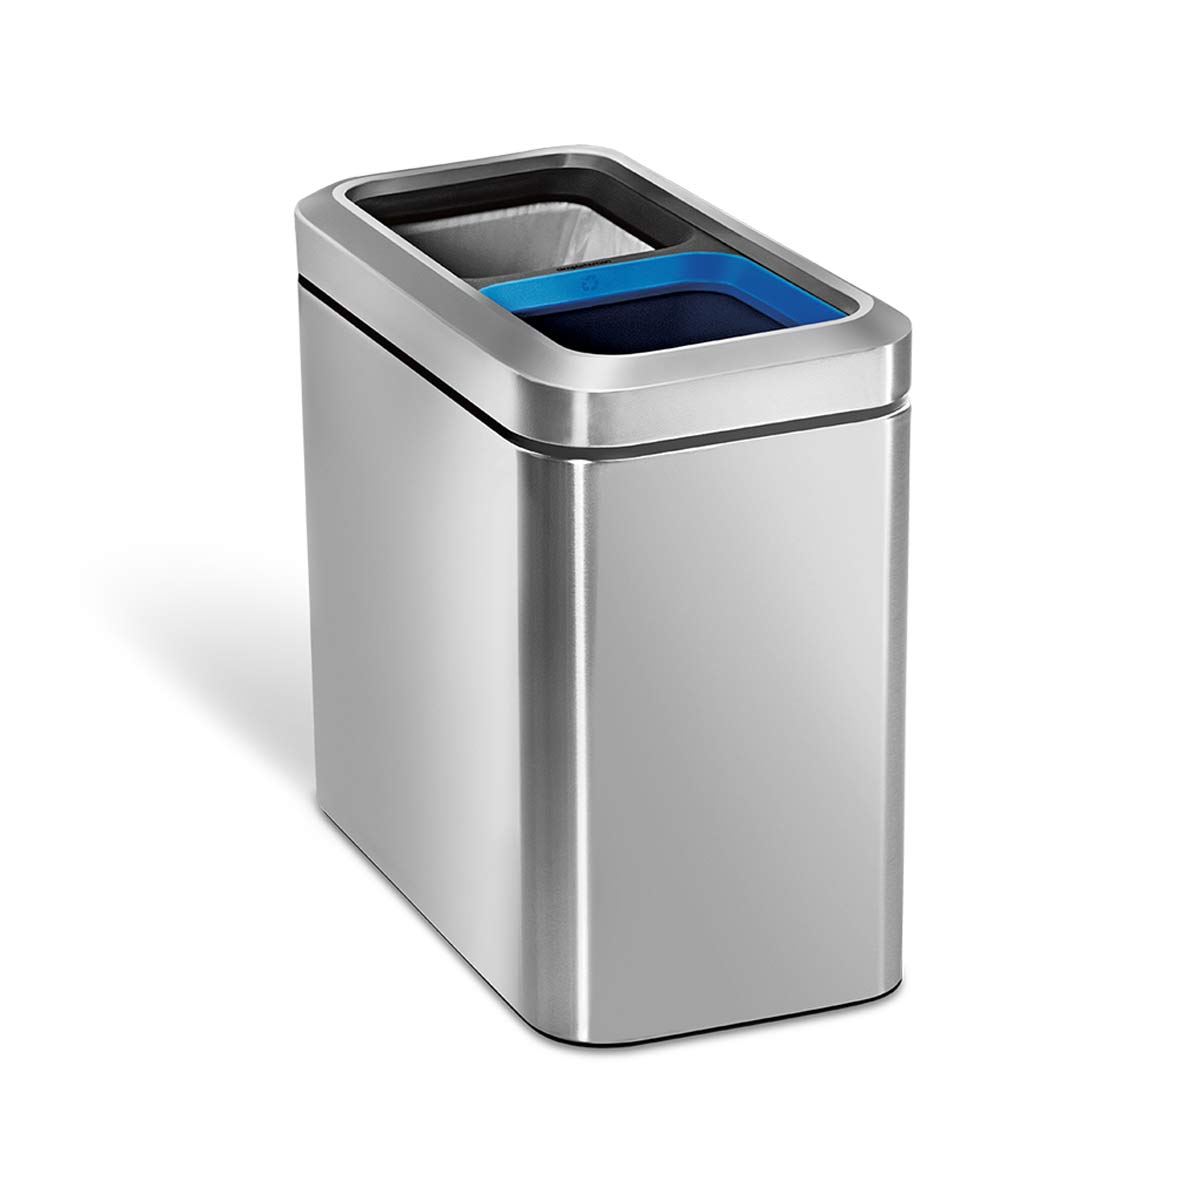 simplehuman Code D 60-Pack 20-Liter Custom-Fit Recycling Liners in Blue